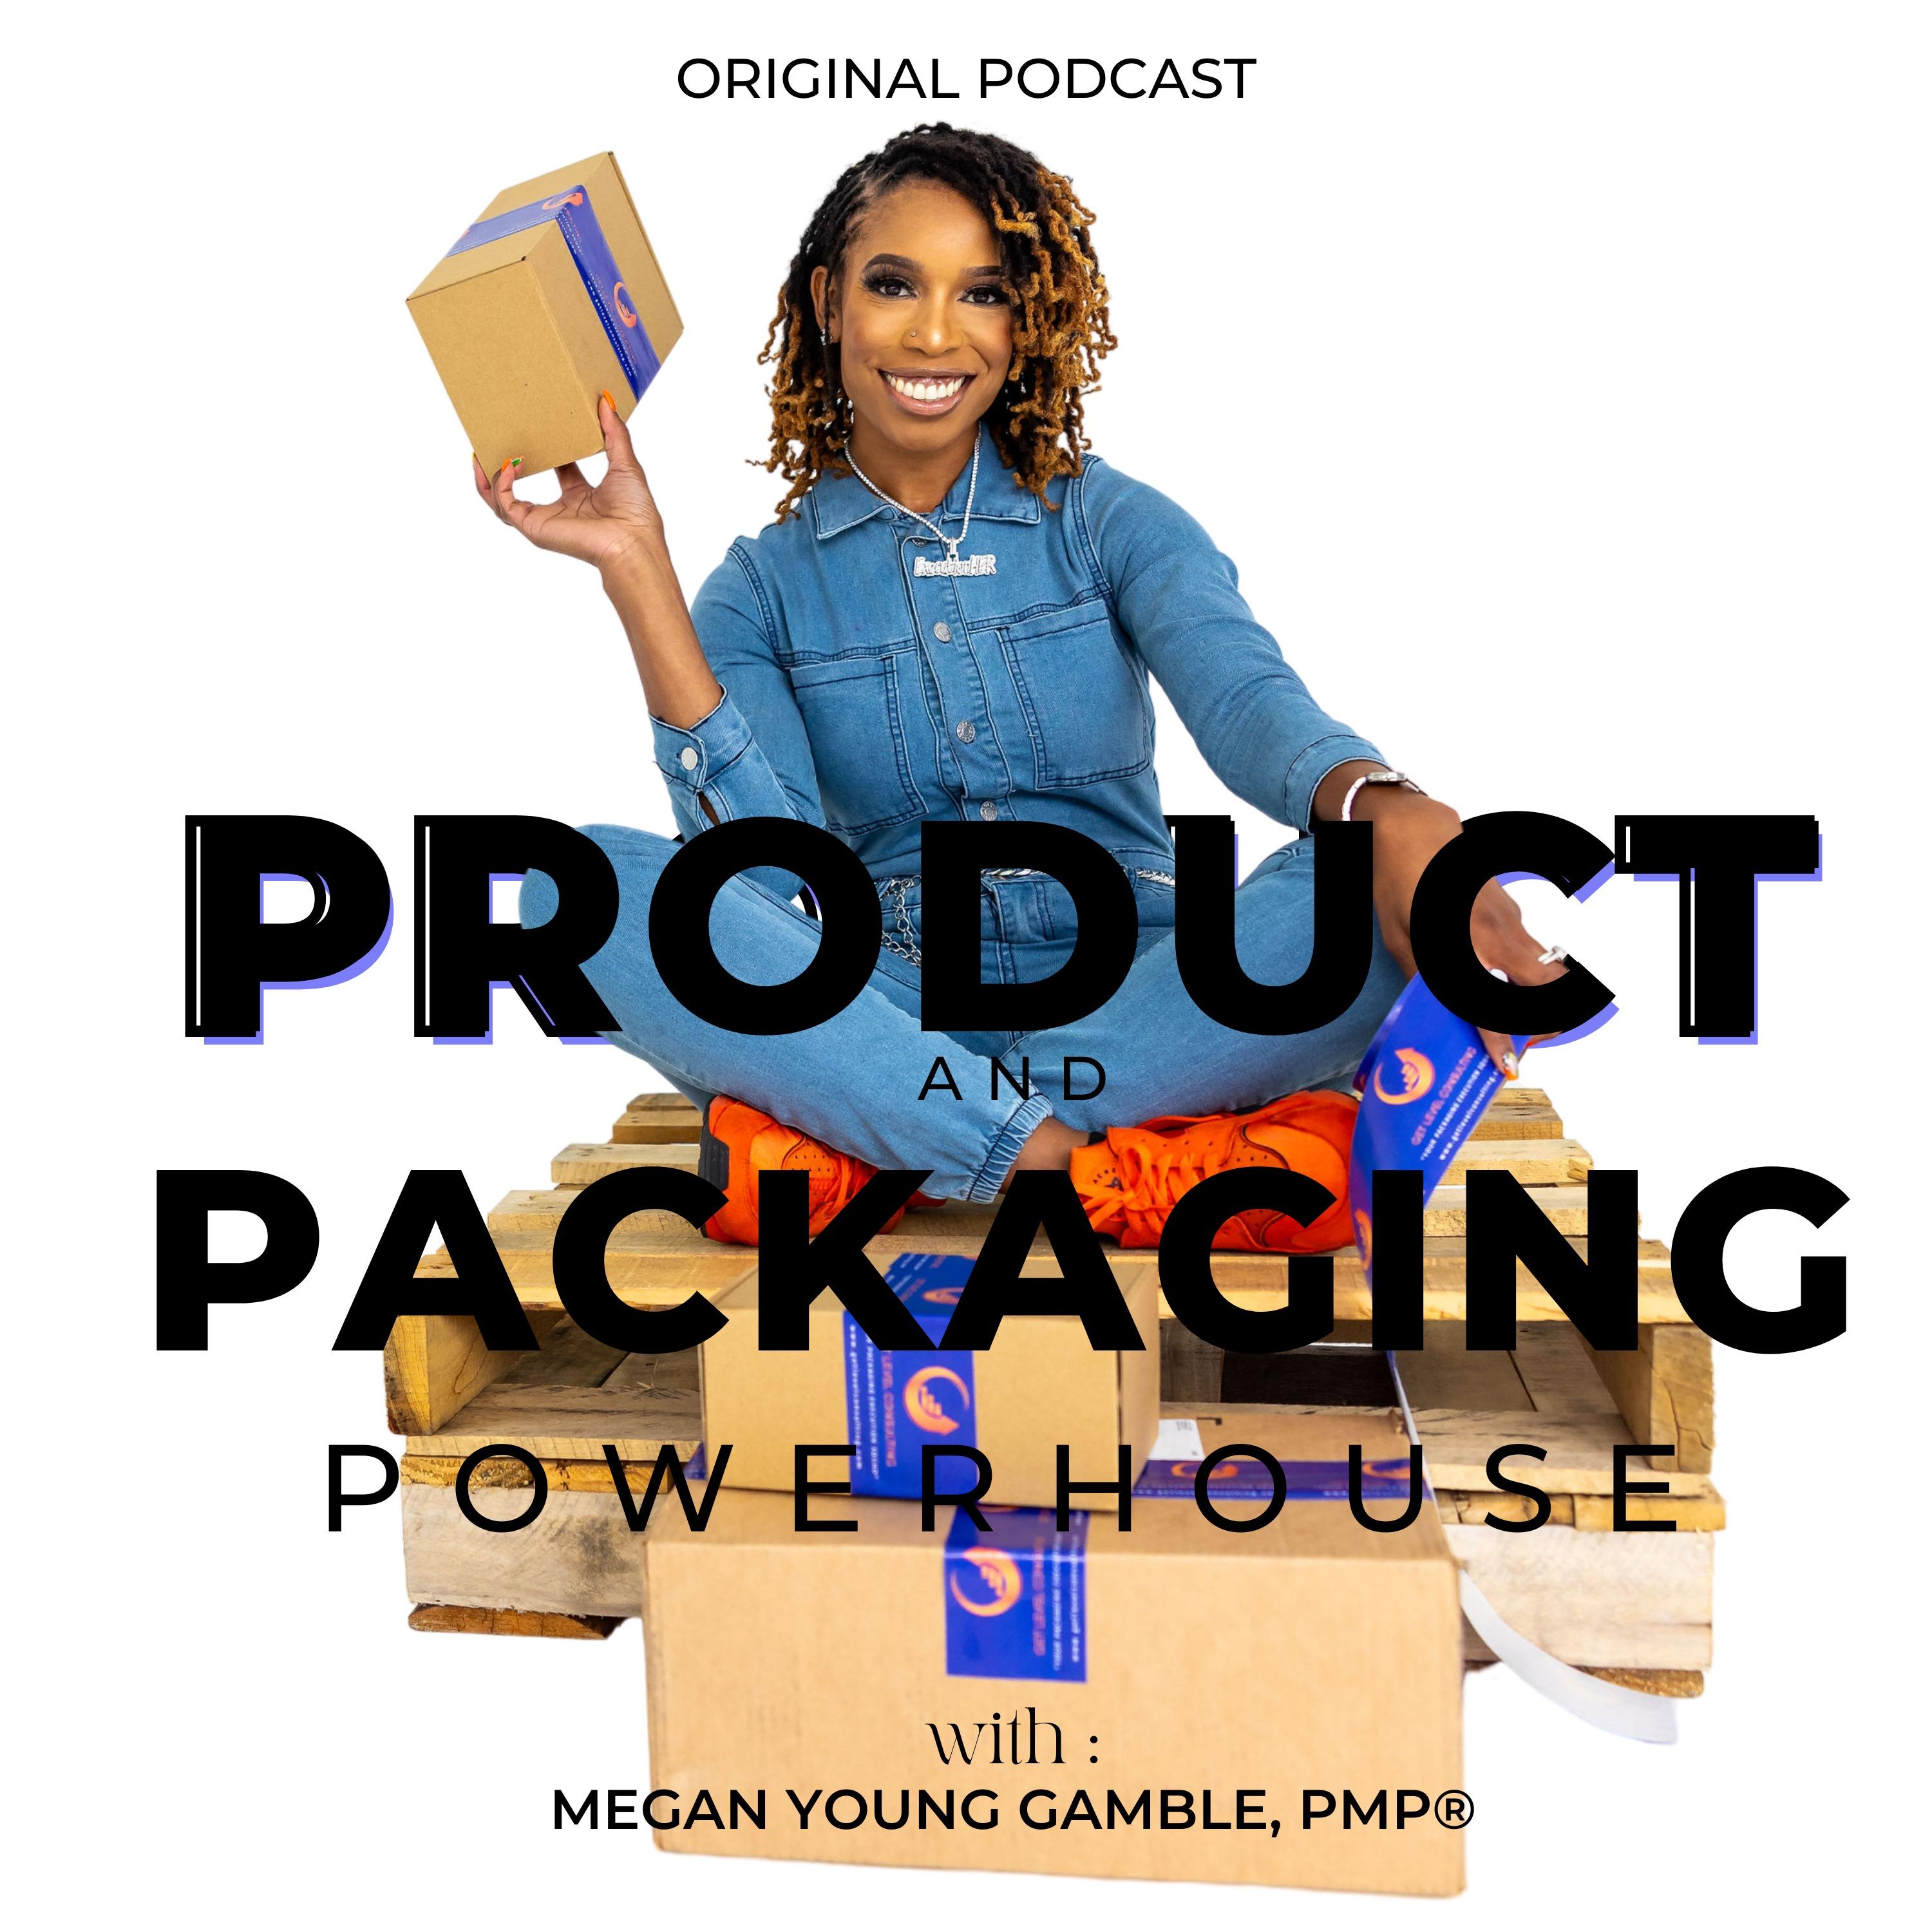 Product & Packaging Powerhouse